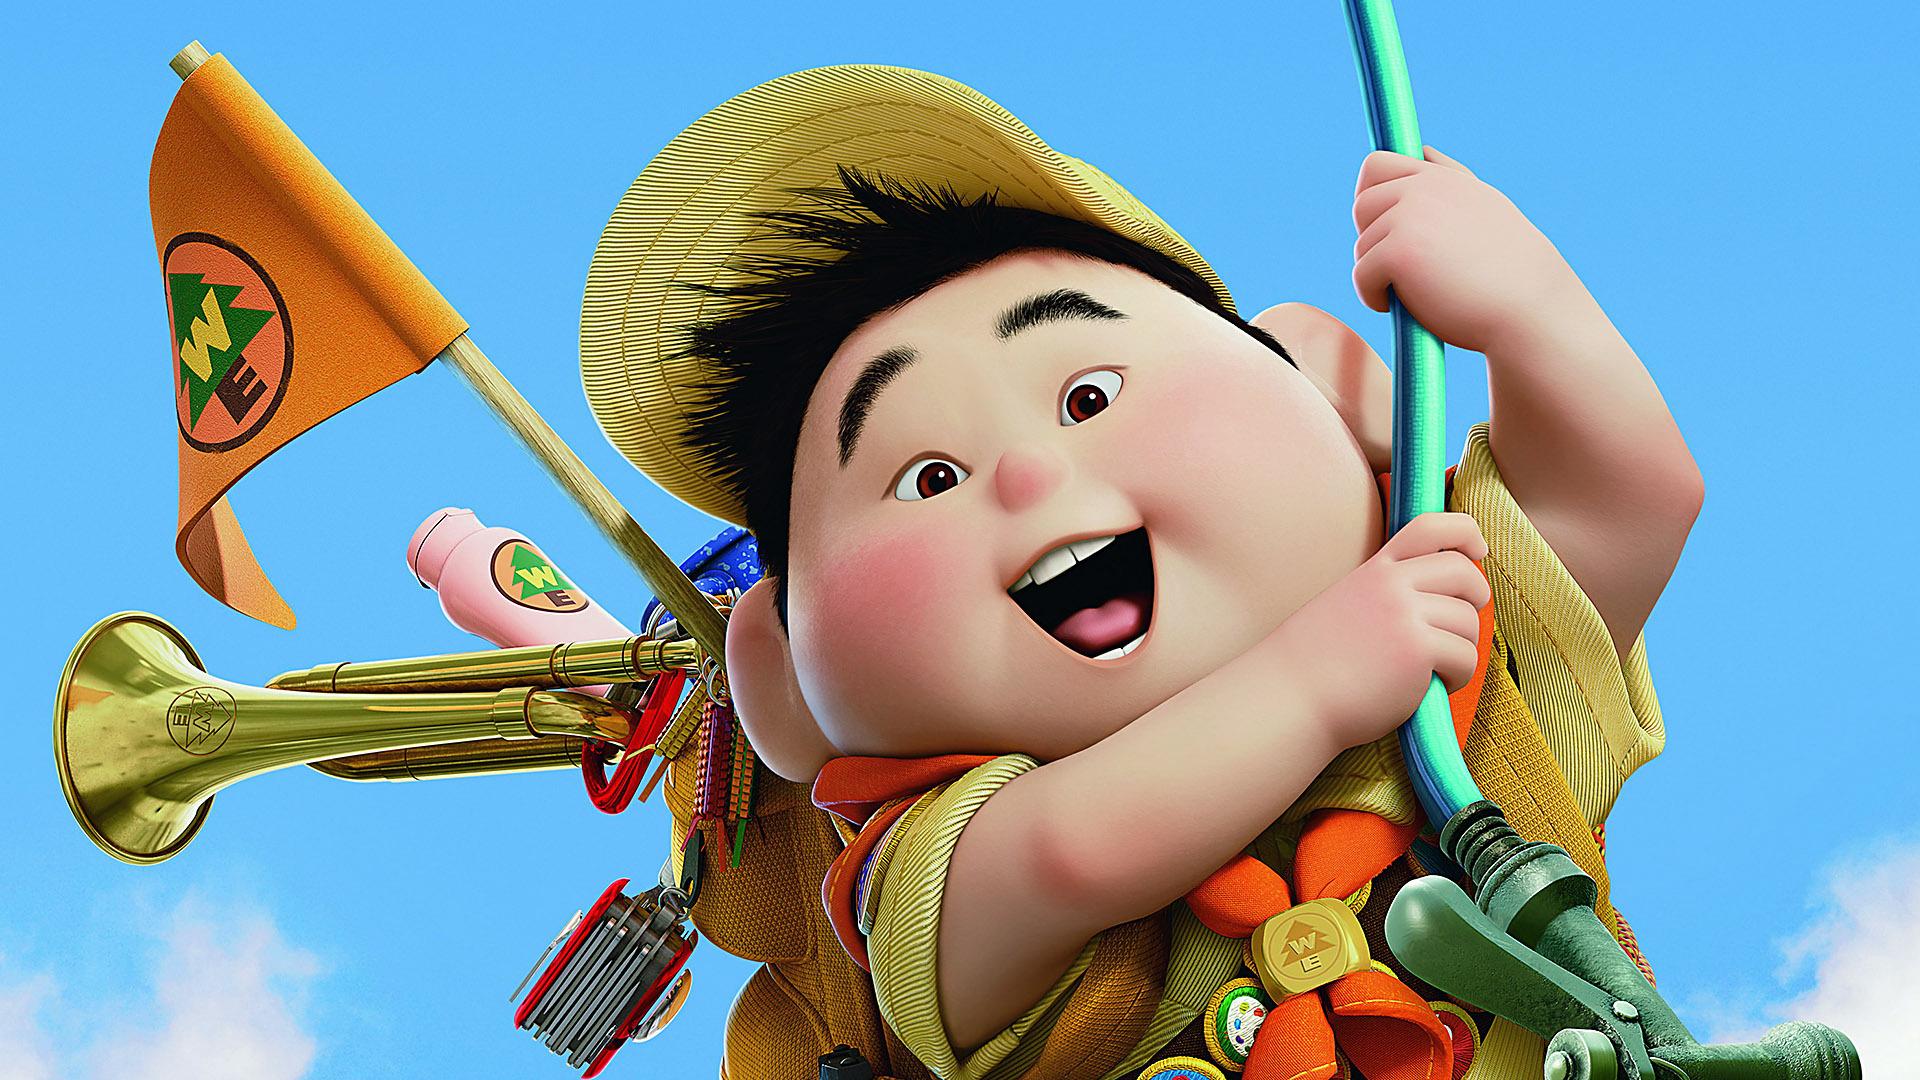 UP Movie 3D Characters Images Wallpapers HD Widescreen Desktop PC